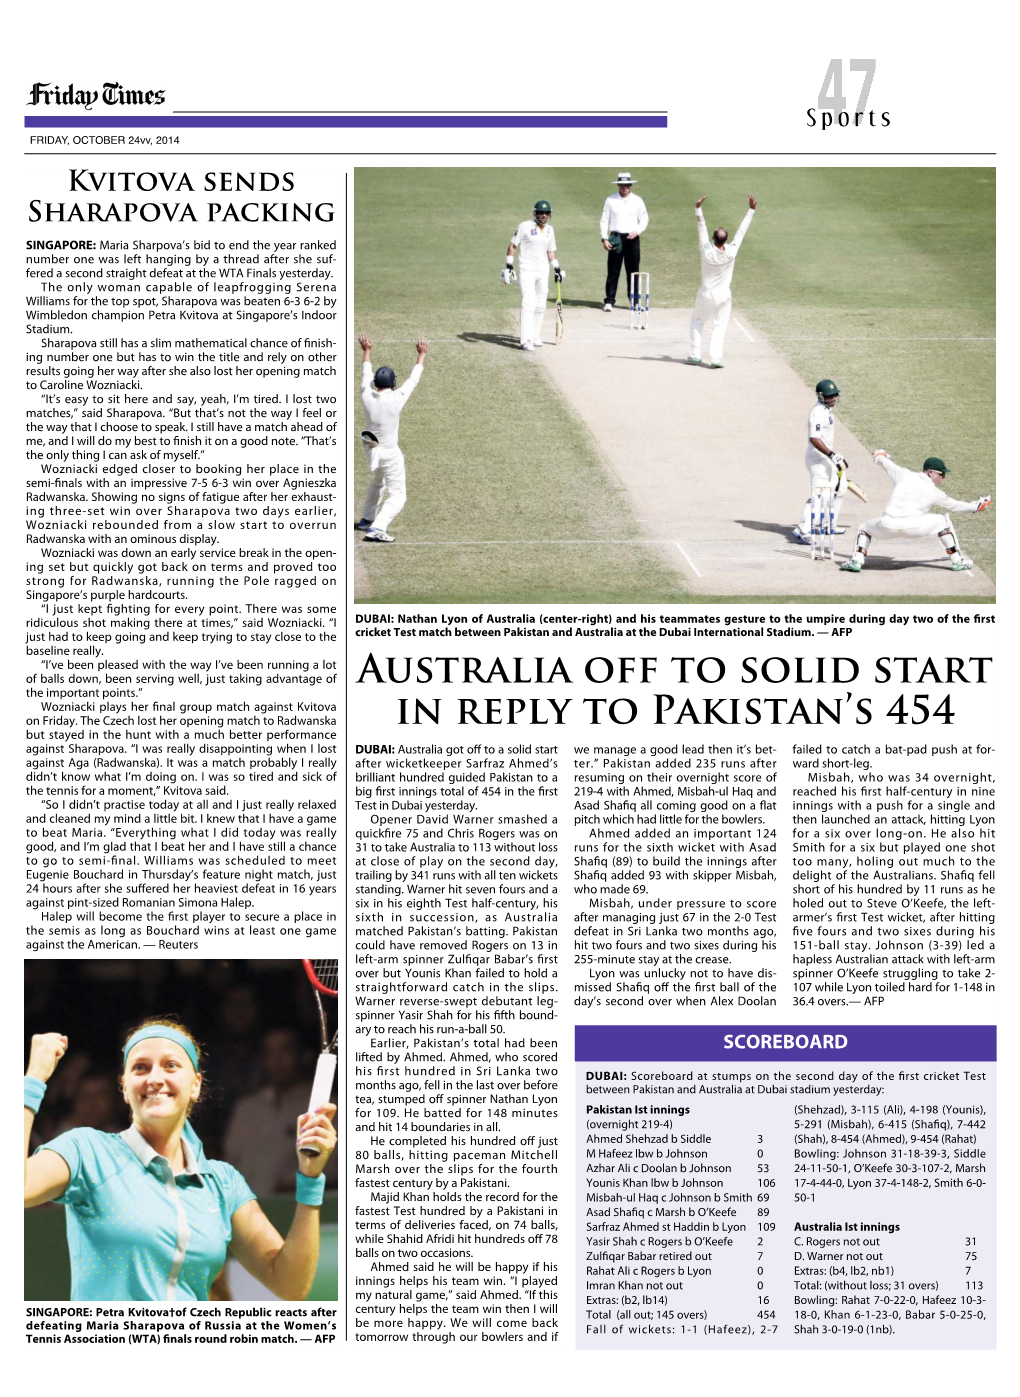 Australia Off to Solid Start in Reply to Pakistan's